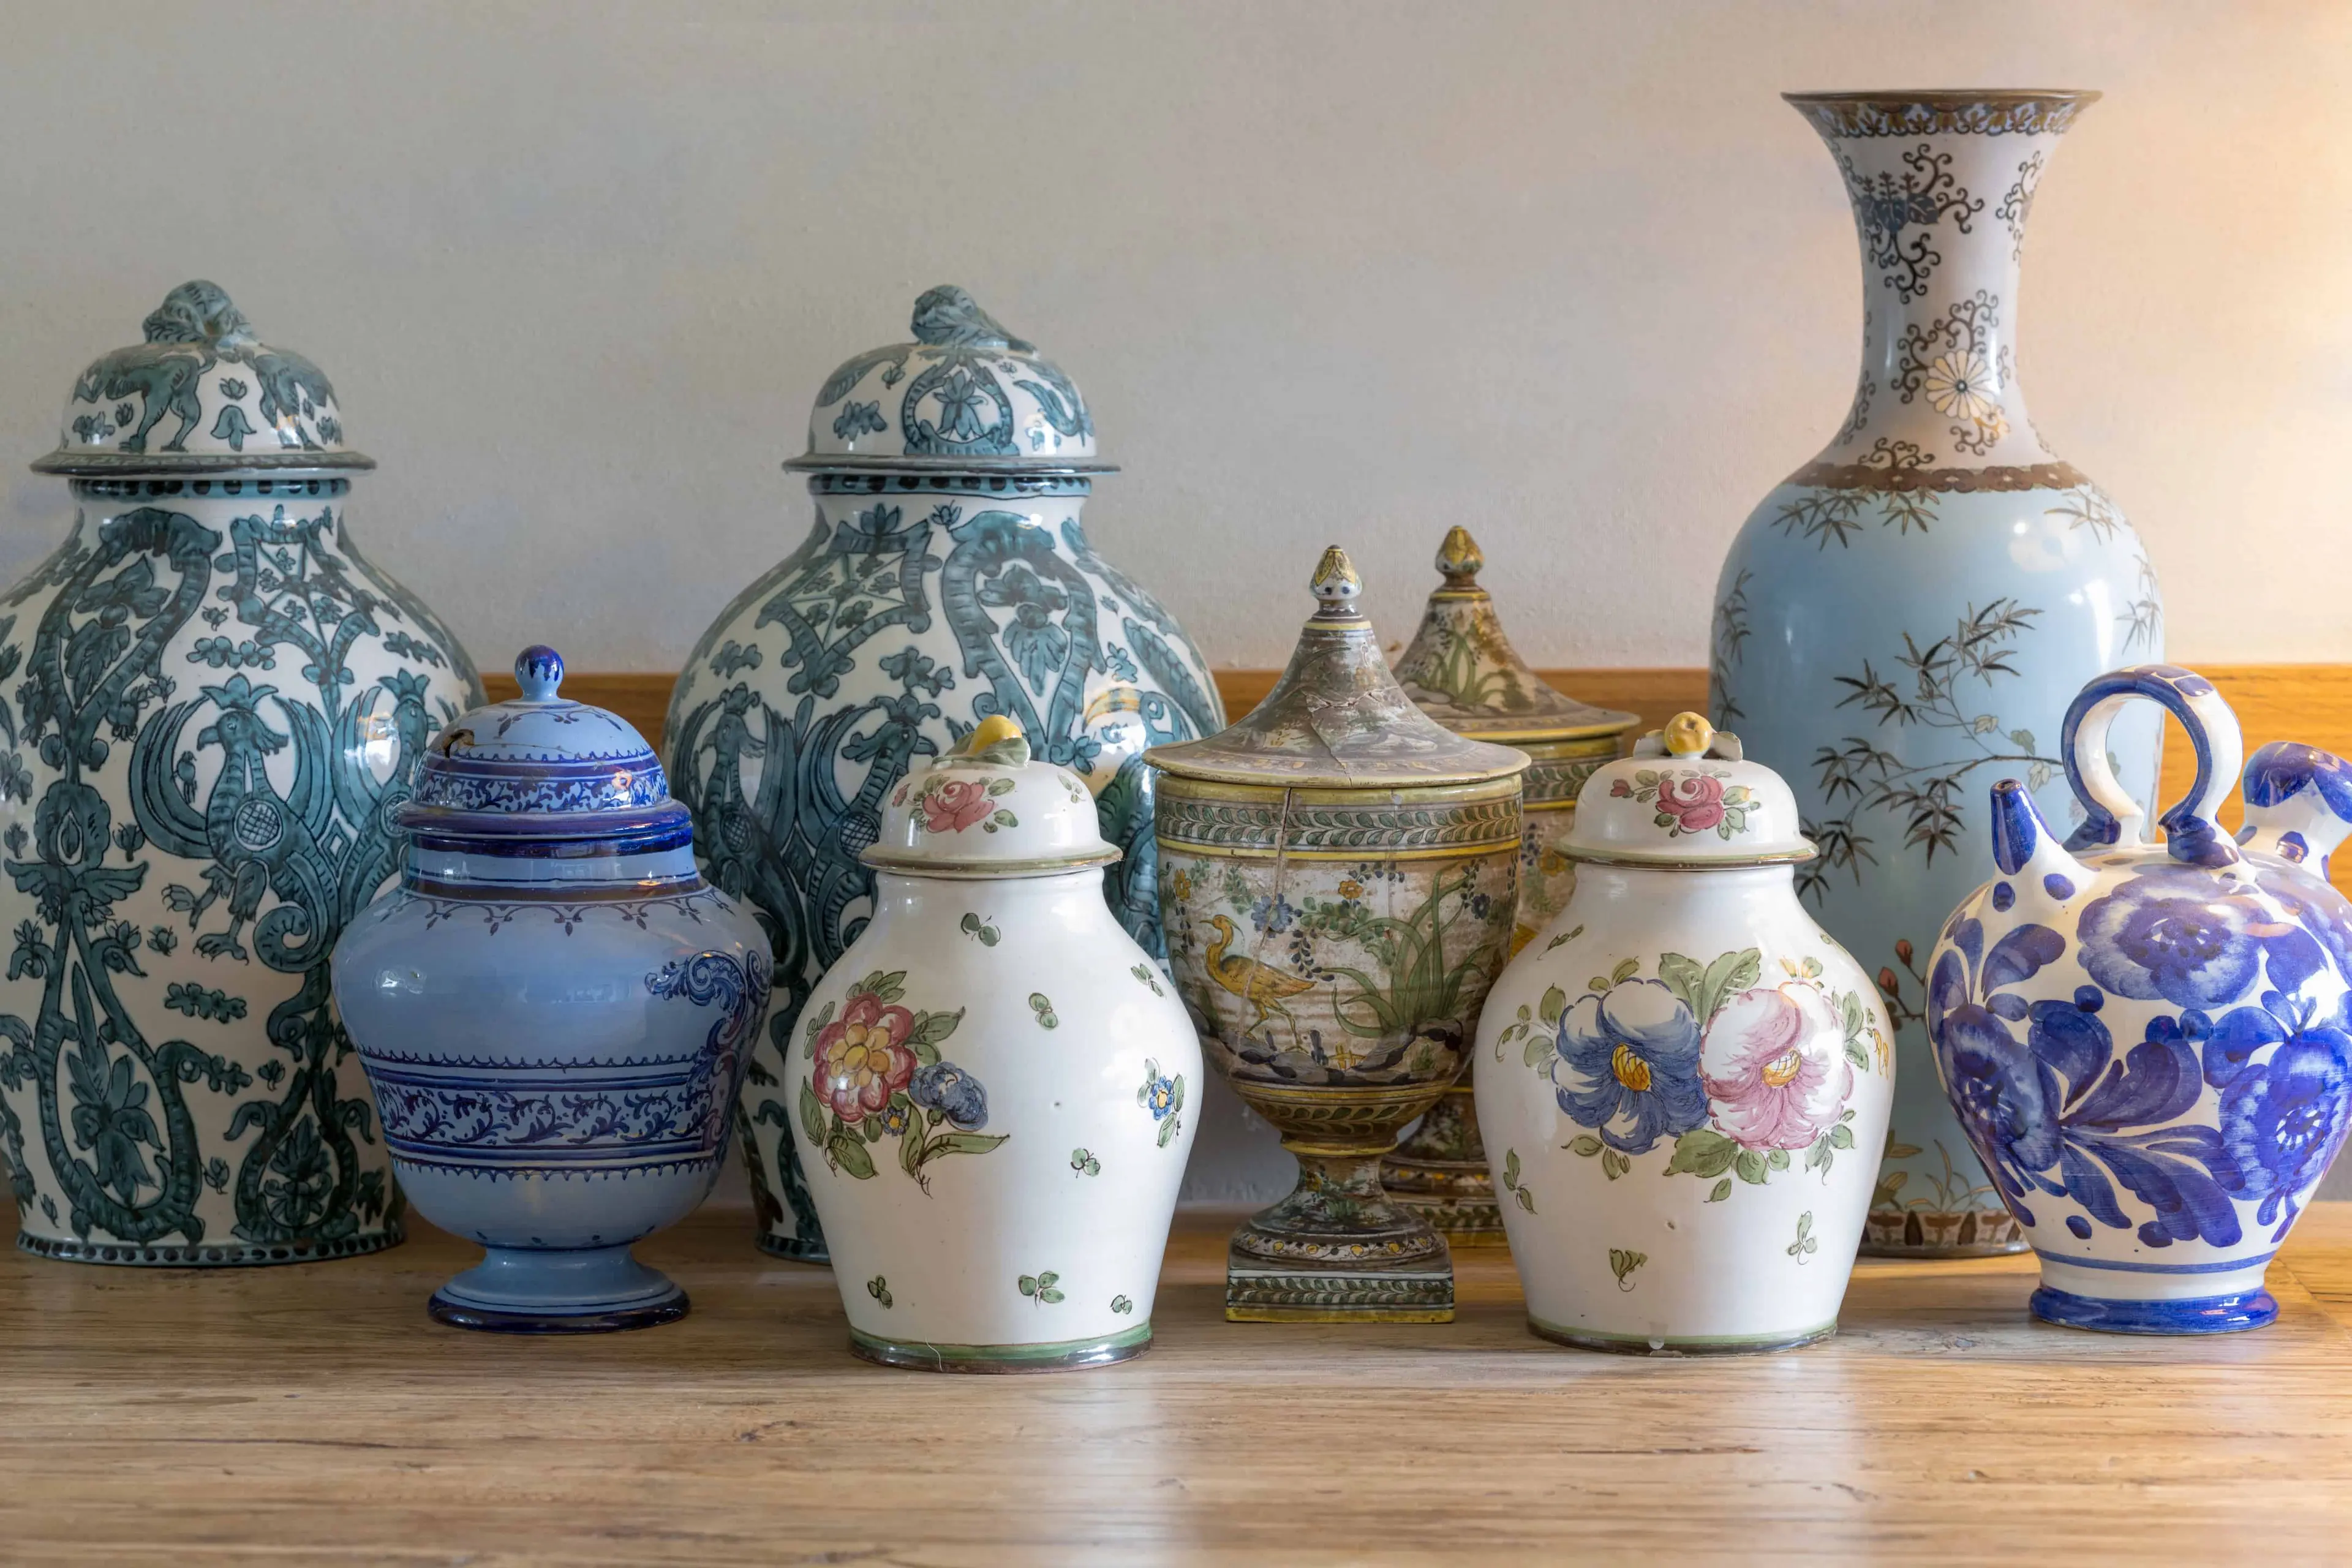 How to Move Antiques - European and chinese antique vase on wooden table- United Van Lines